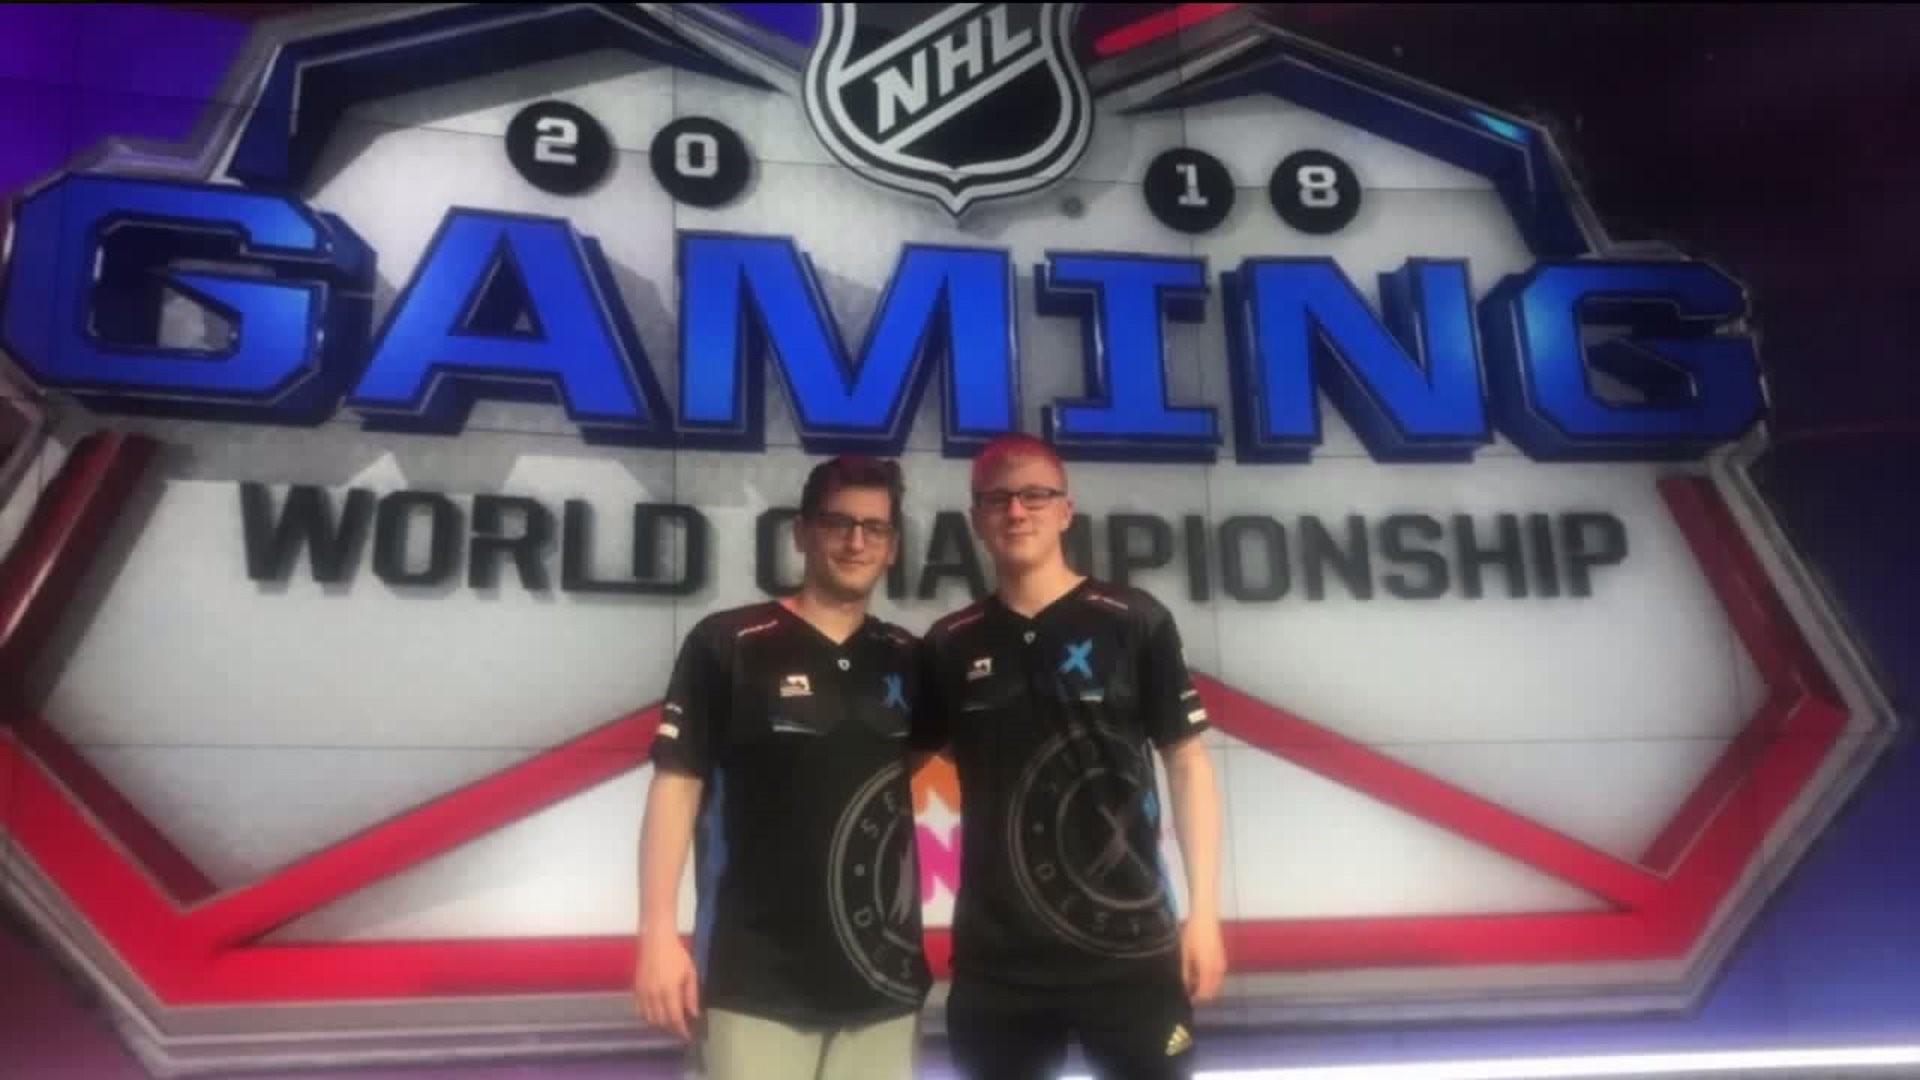 eSports Gamer from Luzerne County Vies for Big Payday in Las Vegas